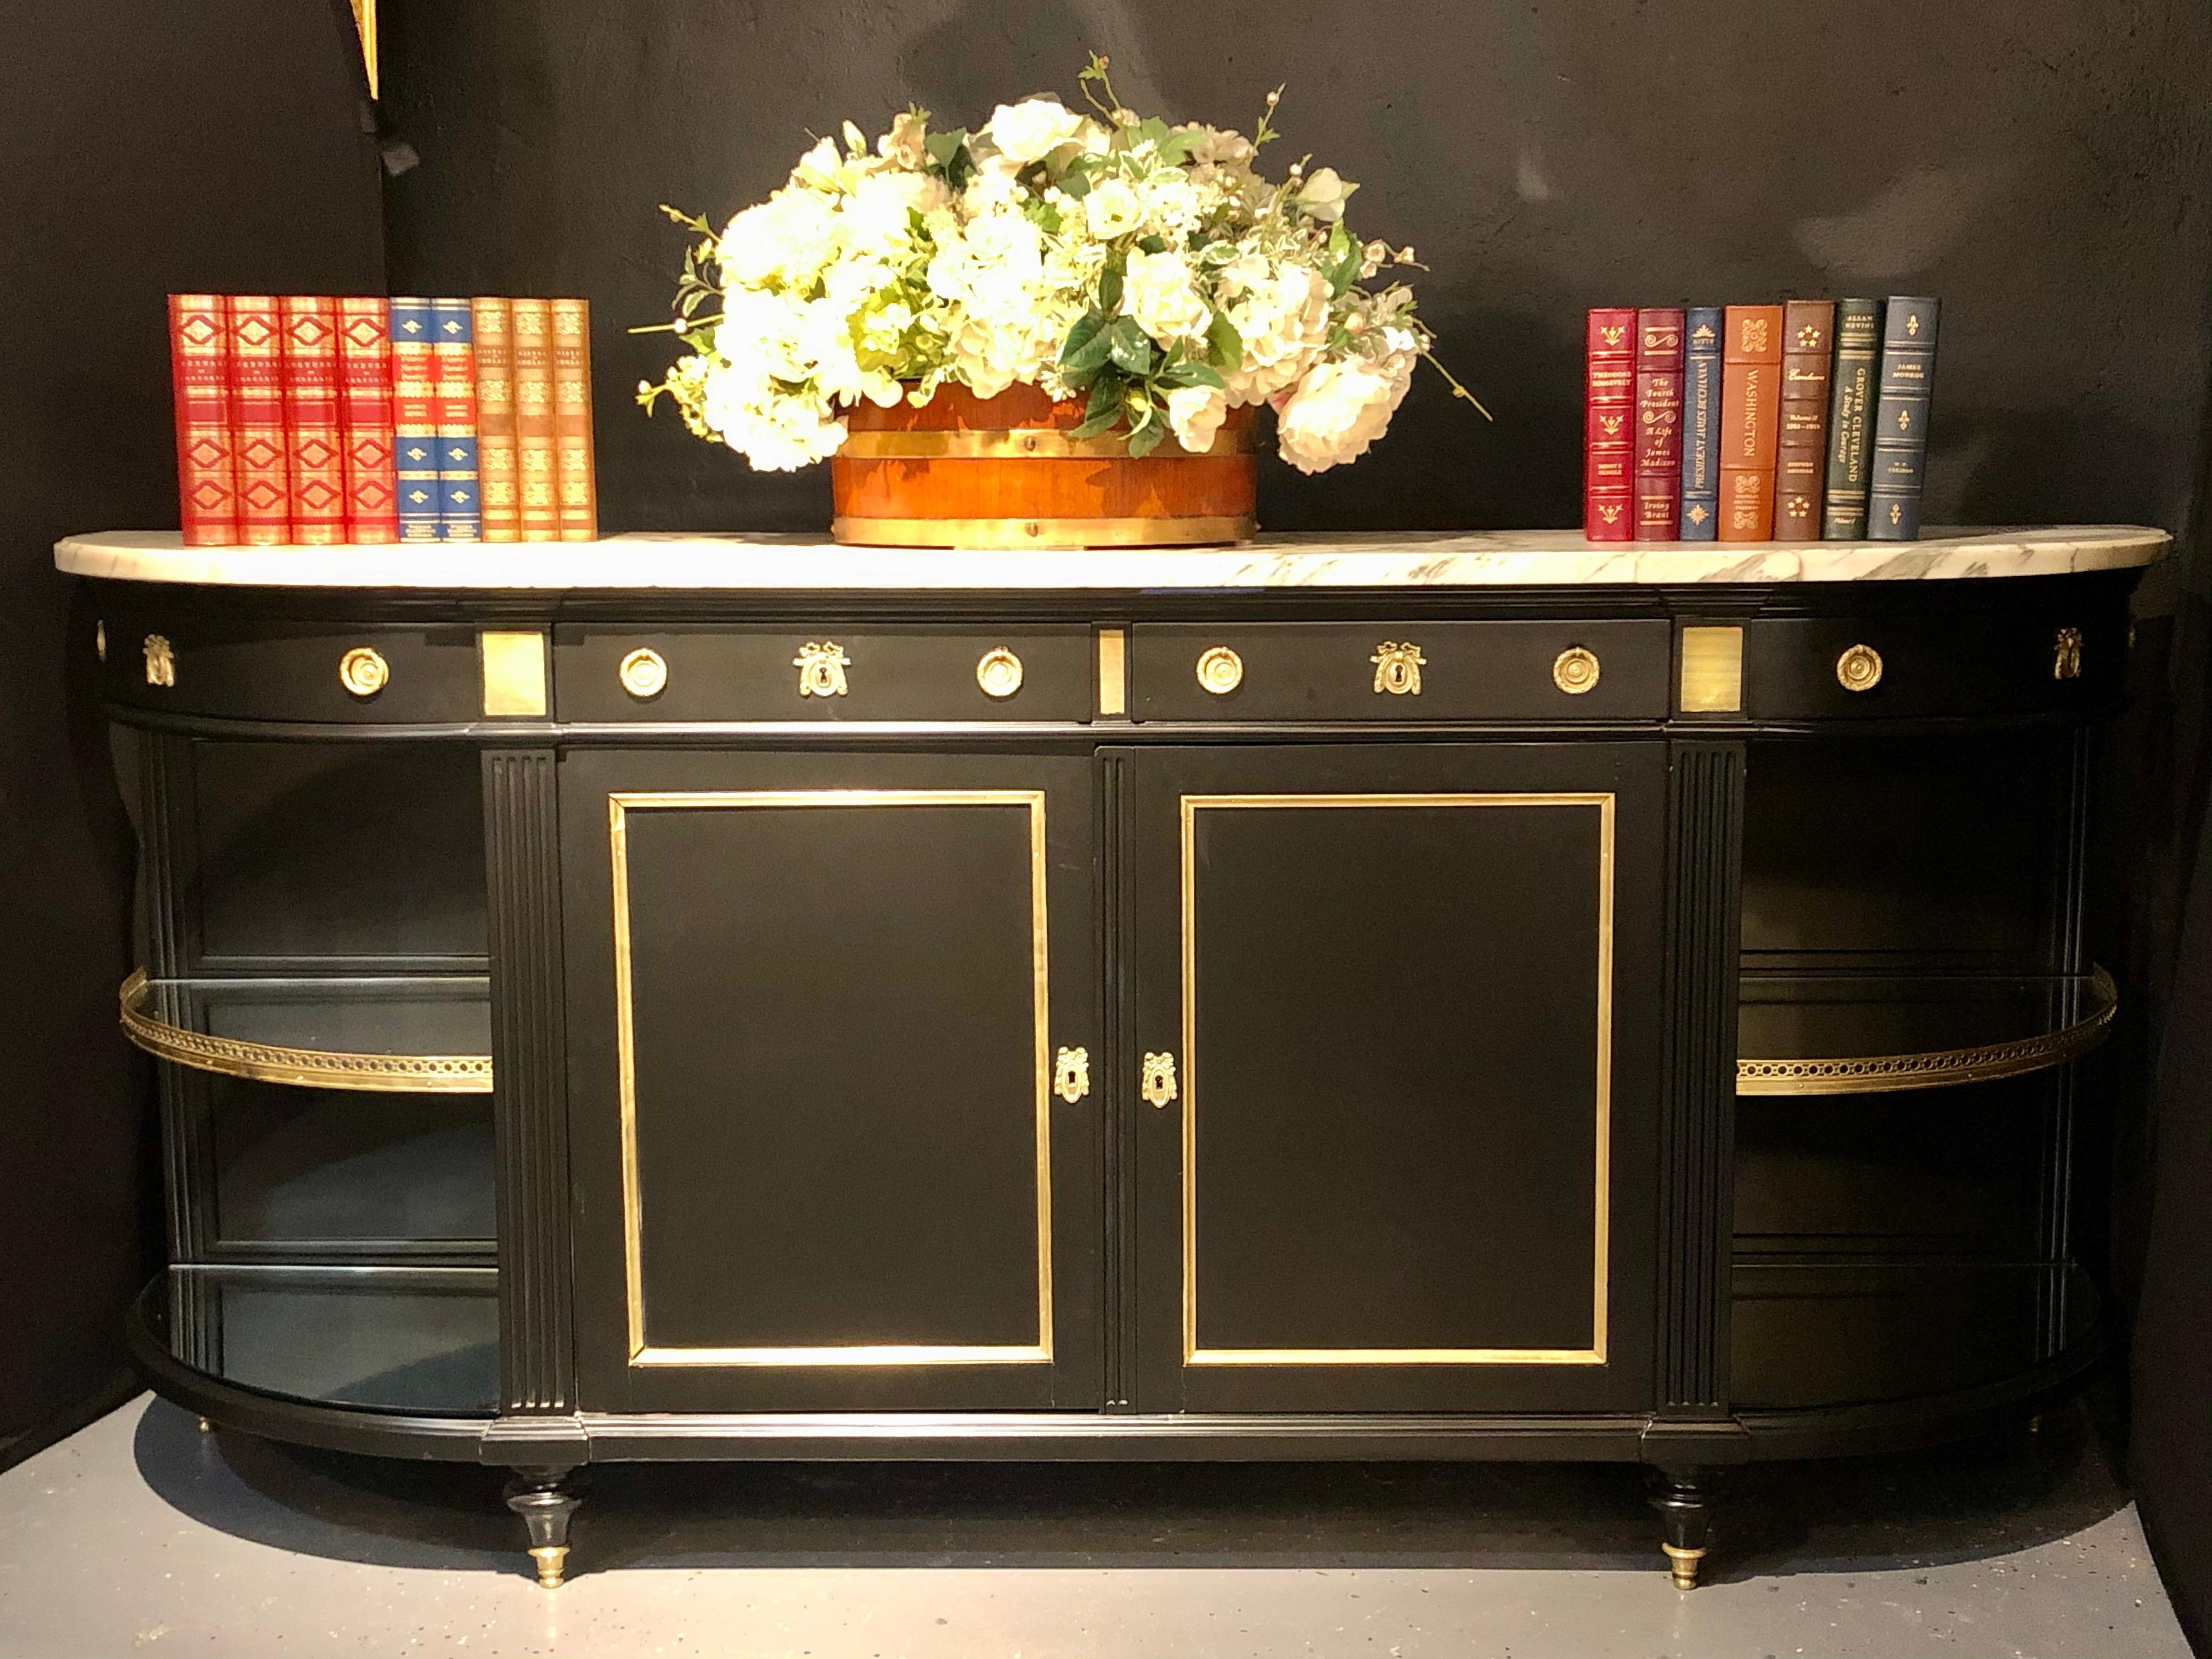 Monumental Hollywood Regency sideboard, console in the manner of Maison Jansen. This fully refinished sideboard is impressive in size and most assuredly quality. The ebony flat finish is simply stunning as it supports a white and gray veined think